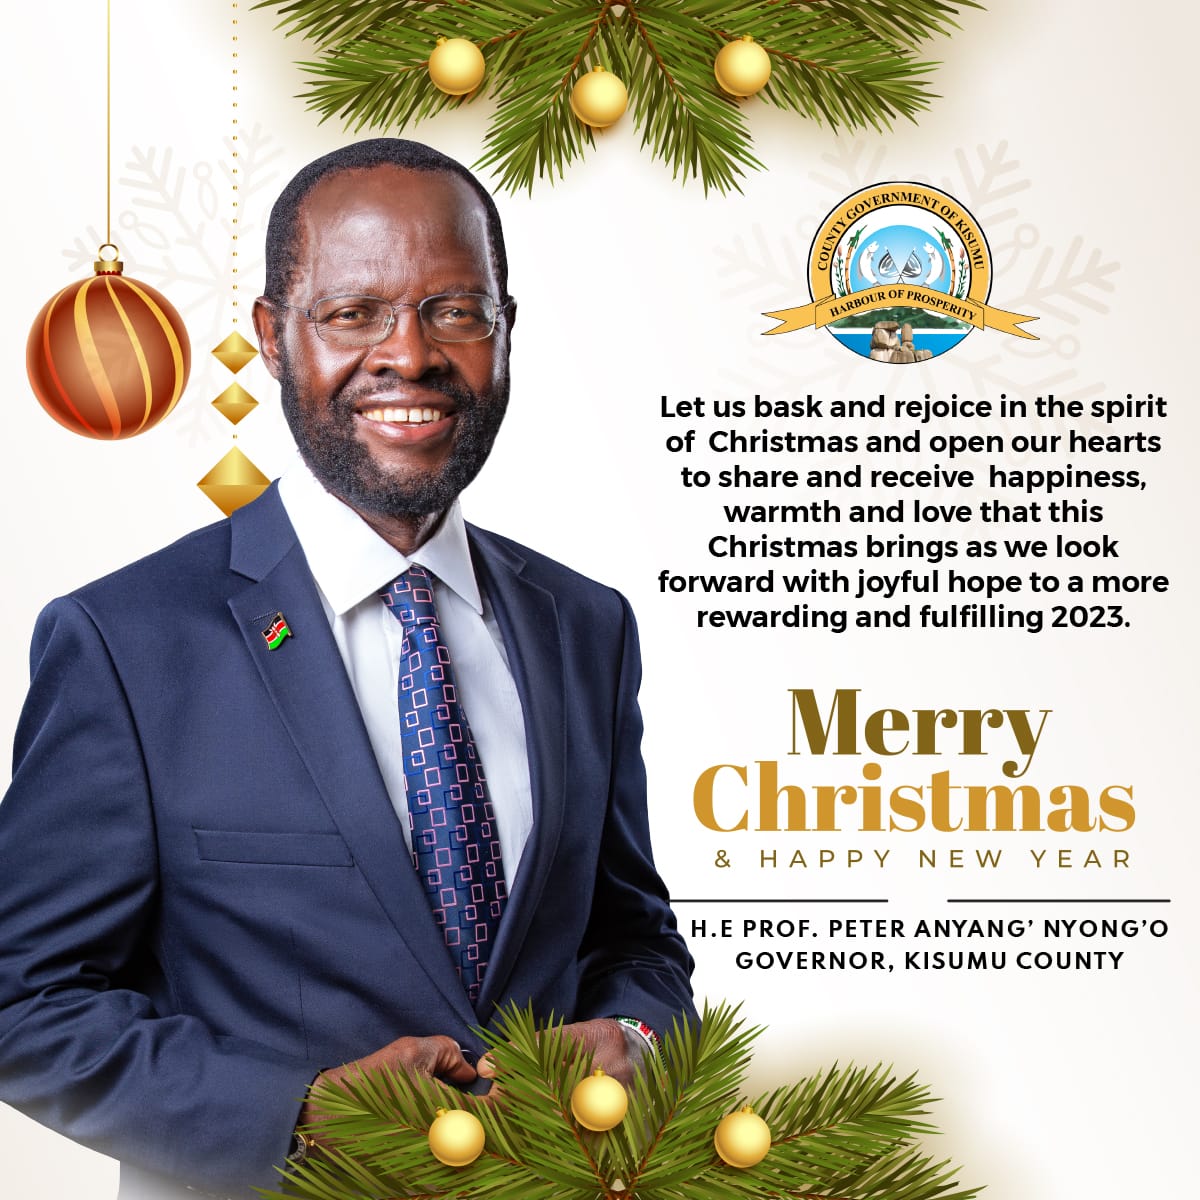 Blessings upon you and your families this holy season. Receive best wishes from H. E. Gov. Prof. @AnyangNyongo #MerryChristmas #MerryChristmas2022